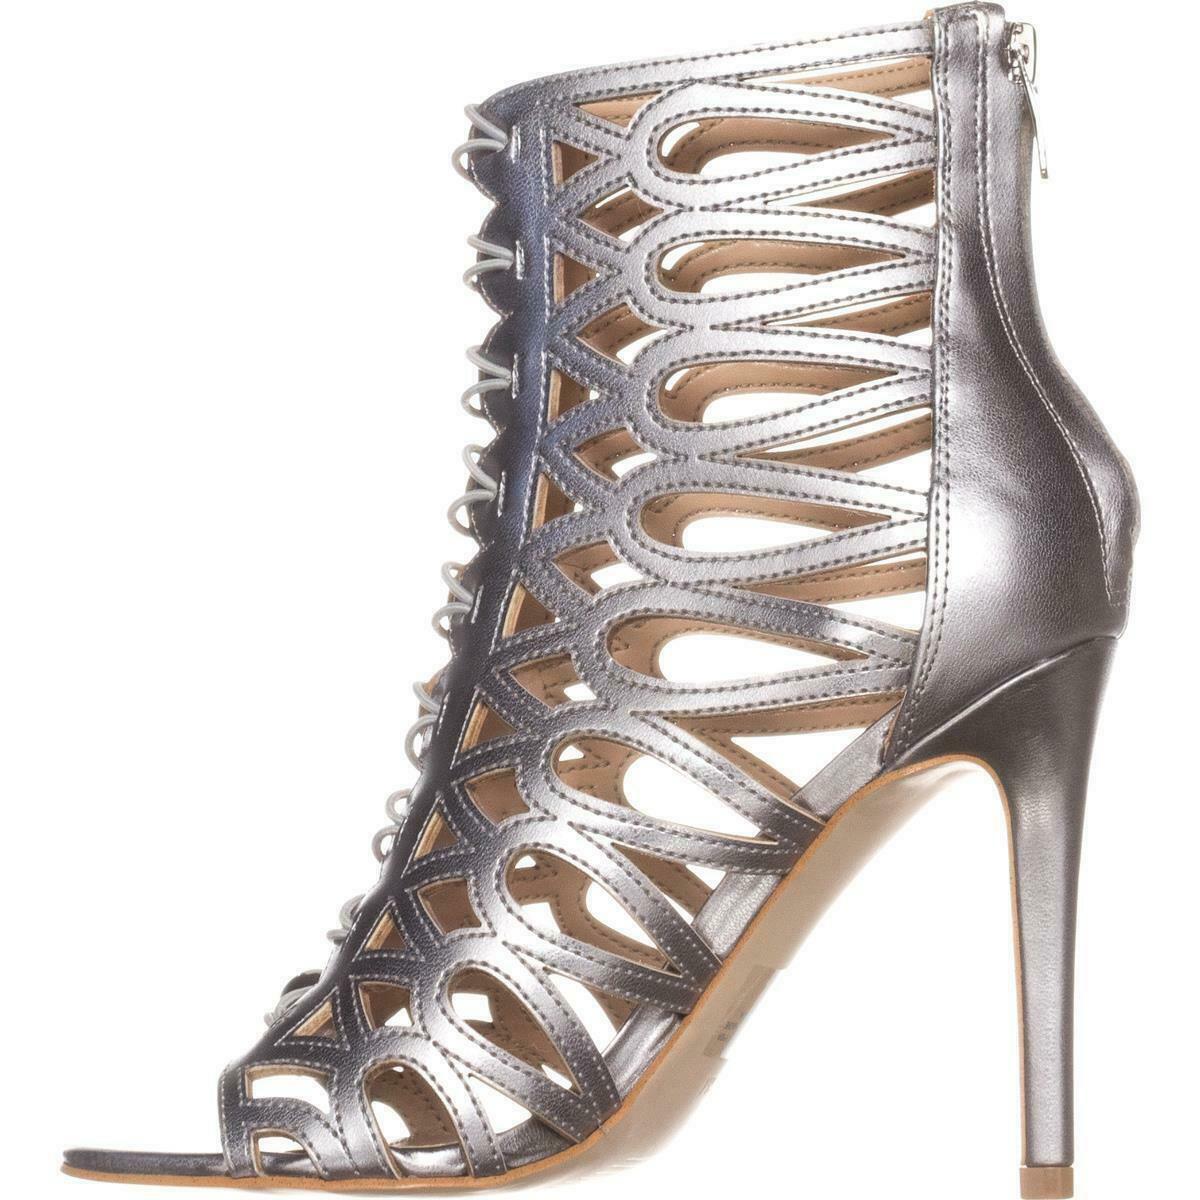 Gues Perlina2 Gladiator Ankle Booties, Silver Multi - Boots